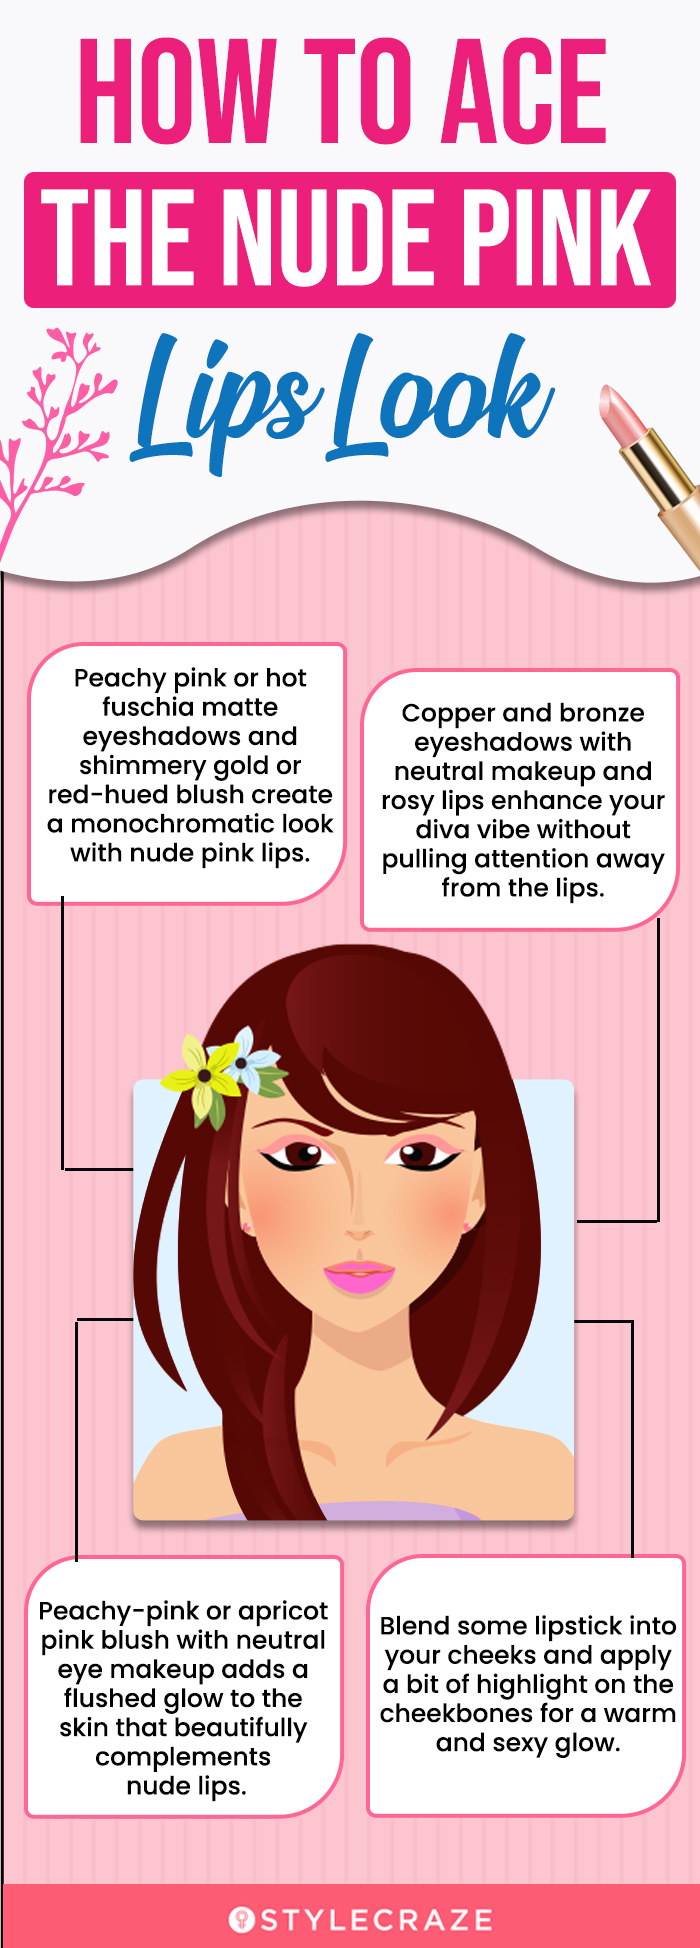  How To Ace The Nude Pink Lips Look (infographic)